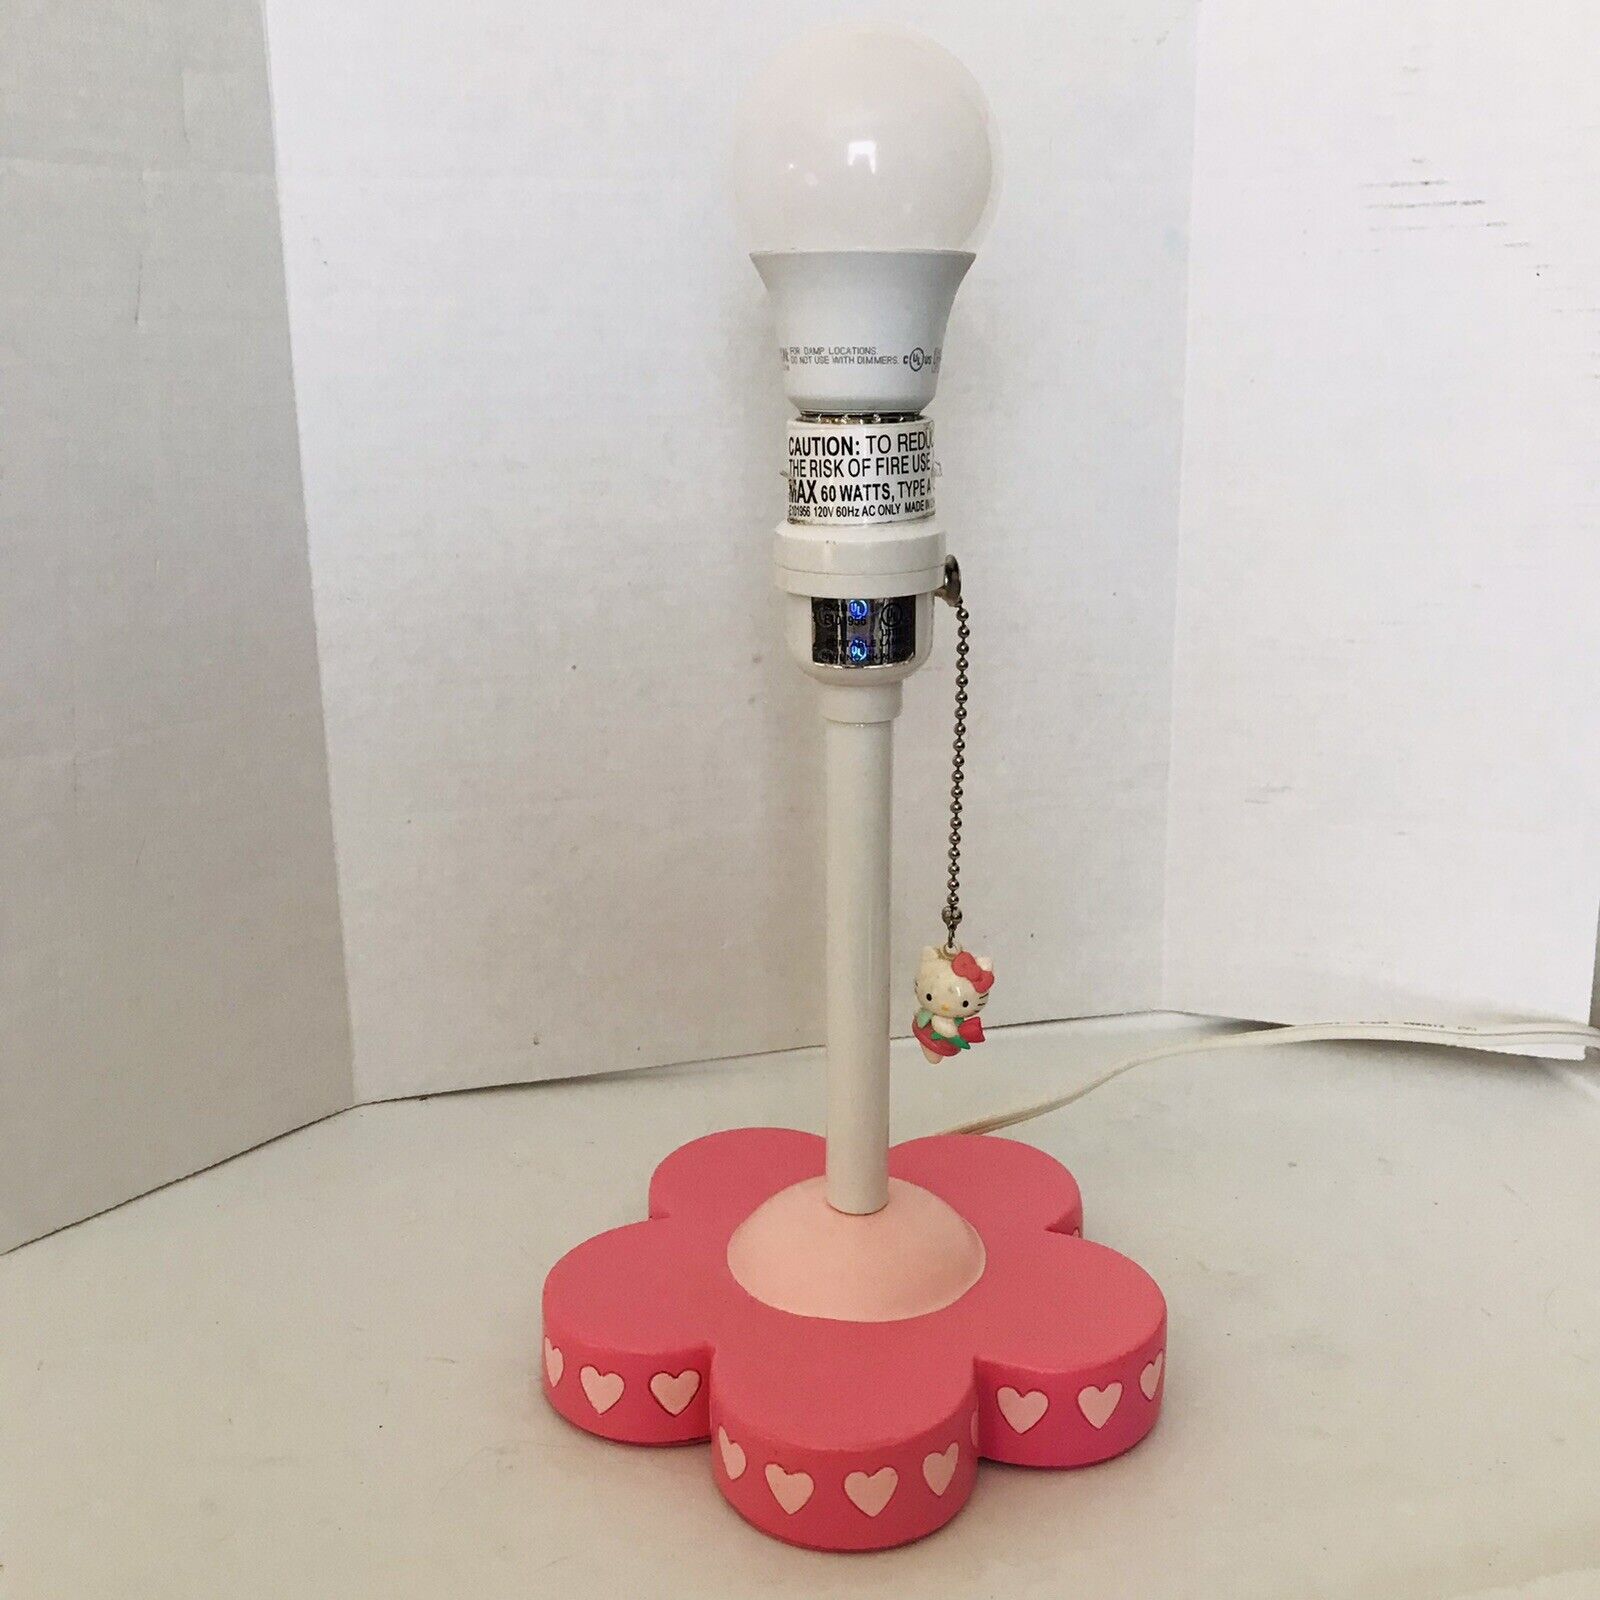 Vintage Hello Kitty 2000 Lamp Sanrio Pull Chain With Charm Pink Flower Base.